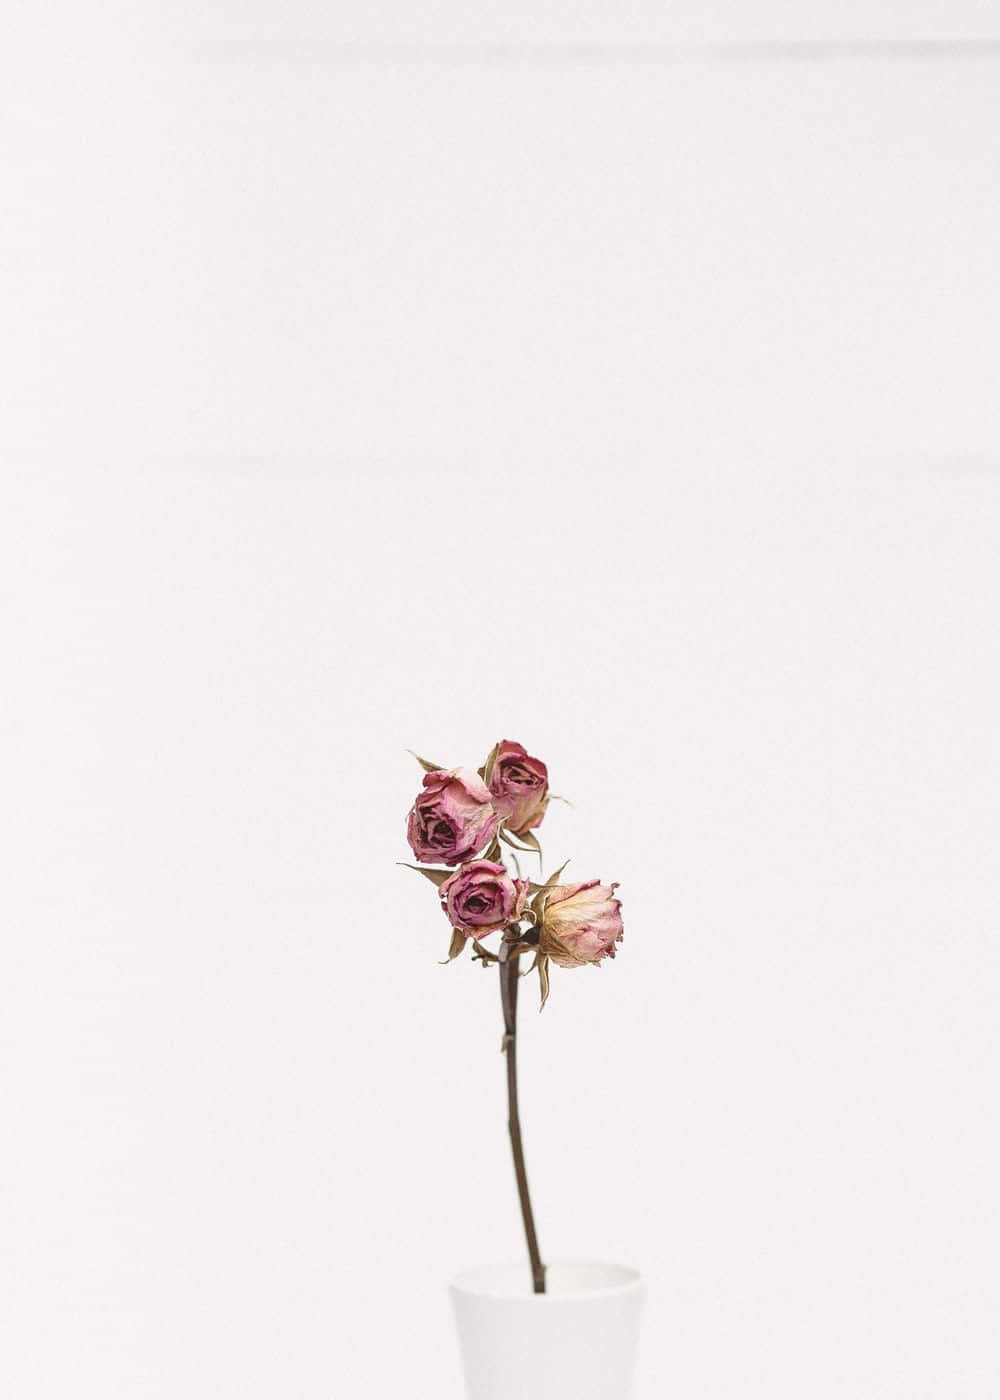 Embracing Simplicity with a Minimalist Flower Wallpaper